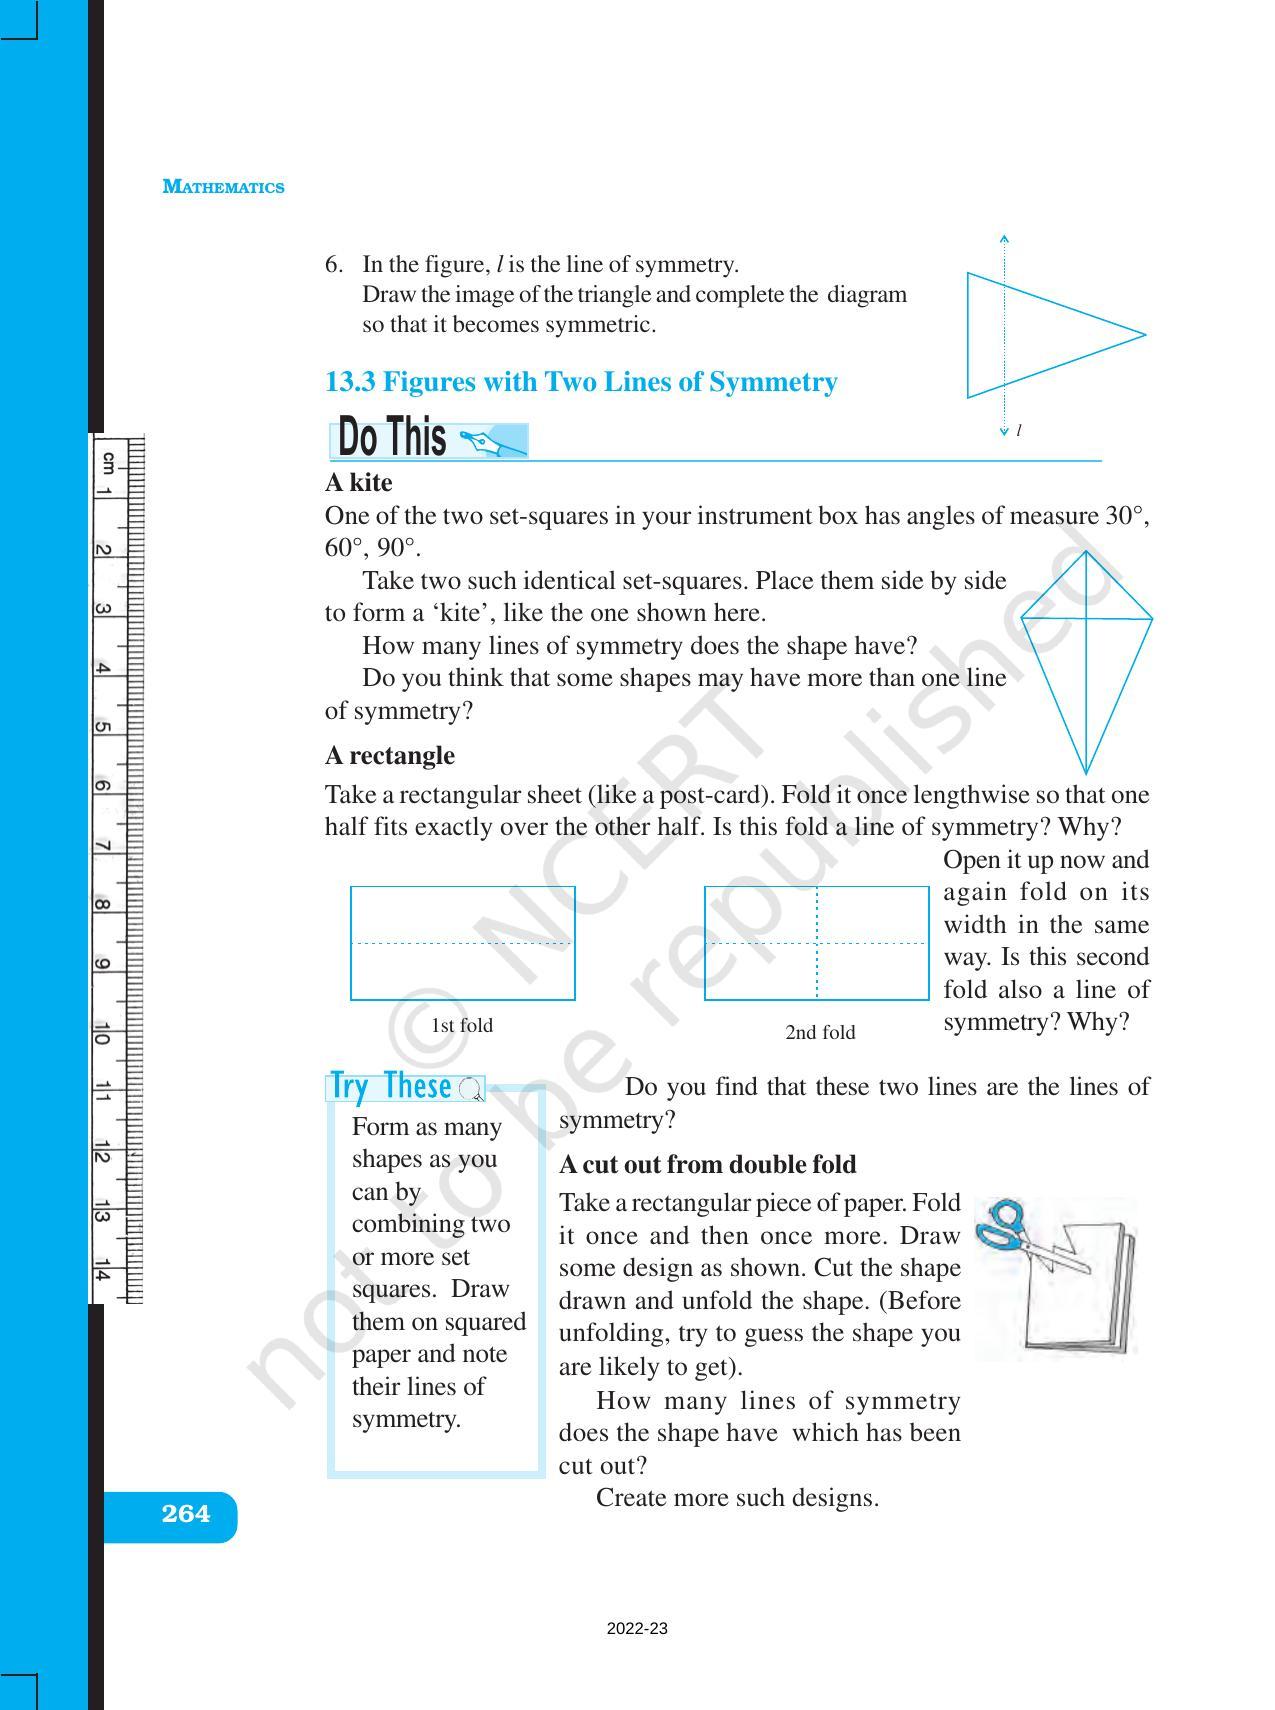 NCERT Book for Class 6 Maths: Chapter 13-Symmetry - Page 4